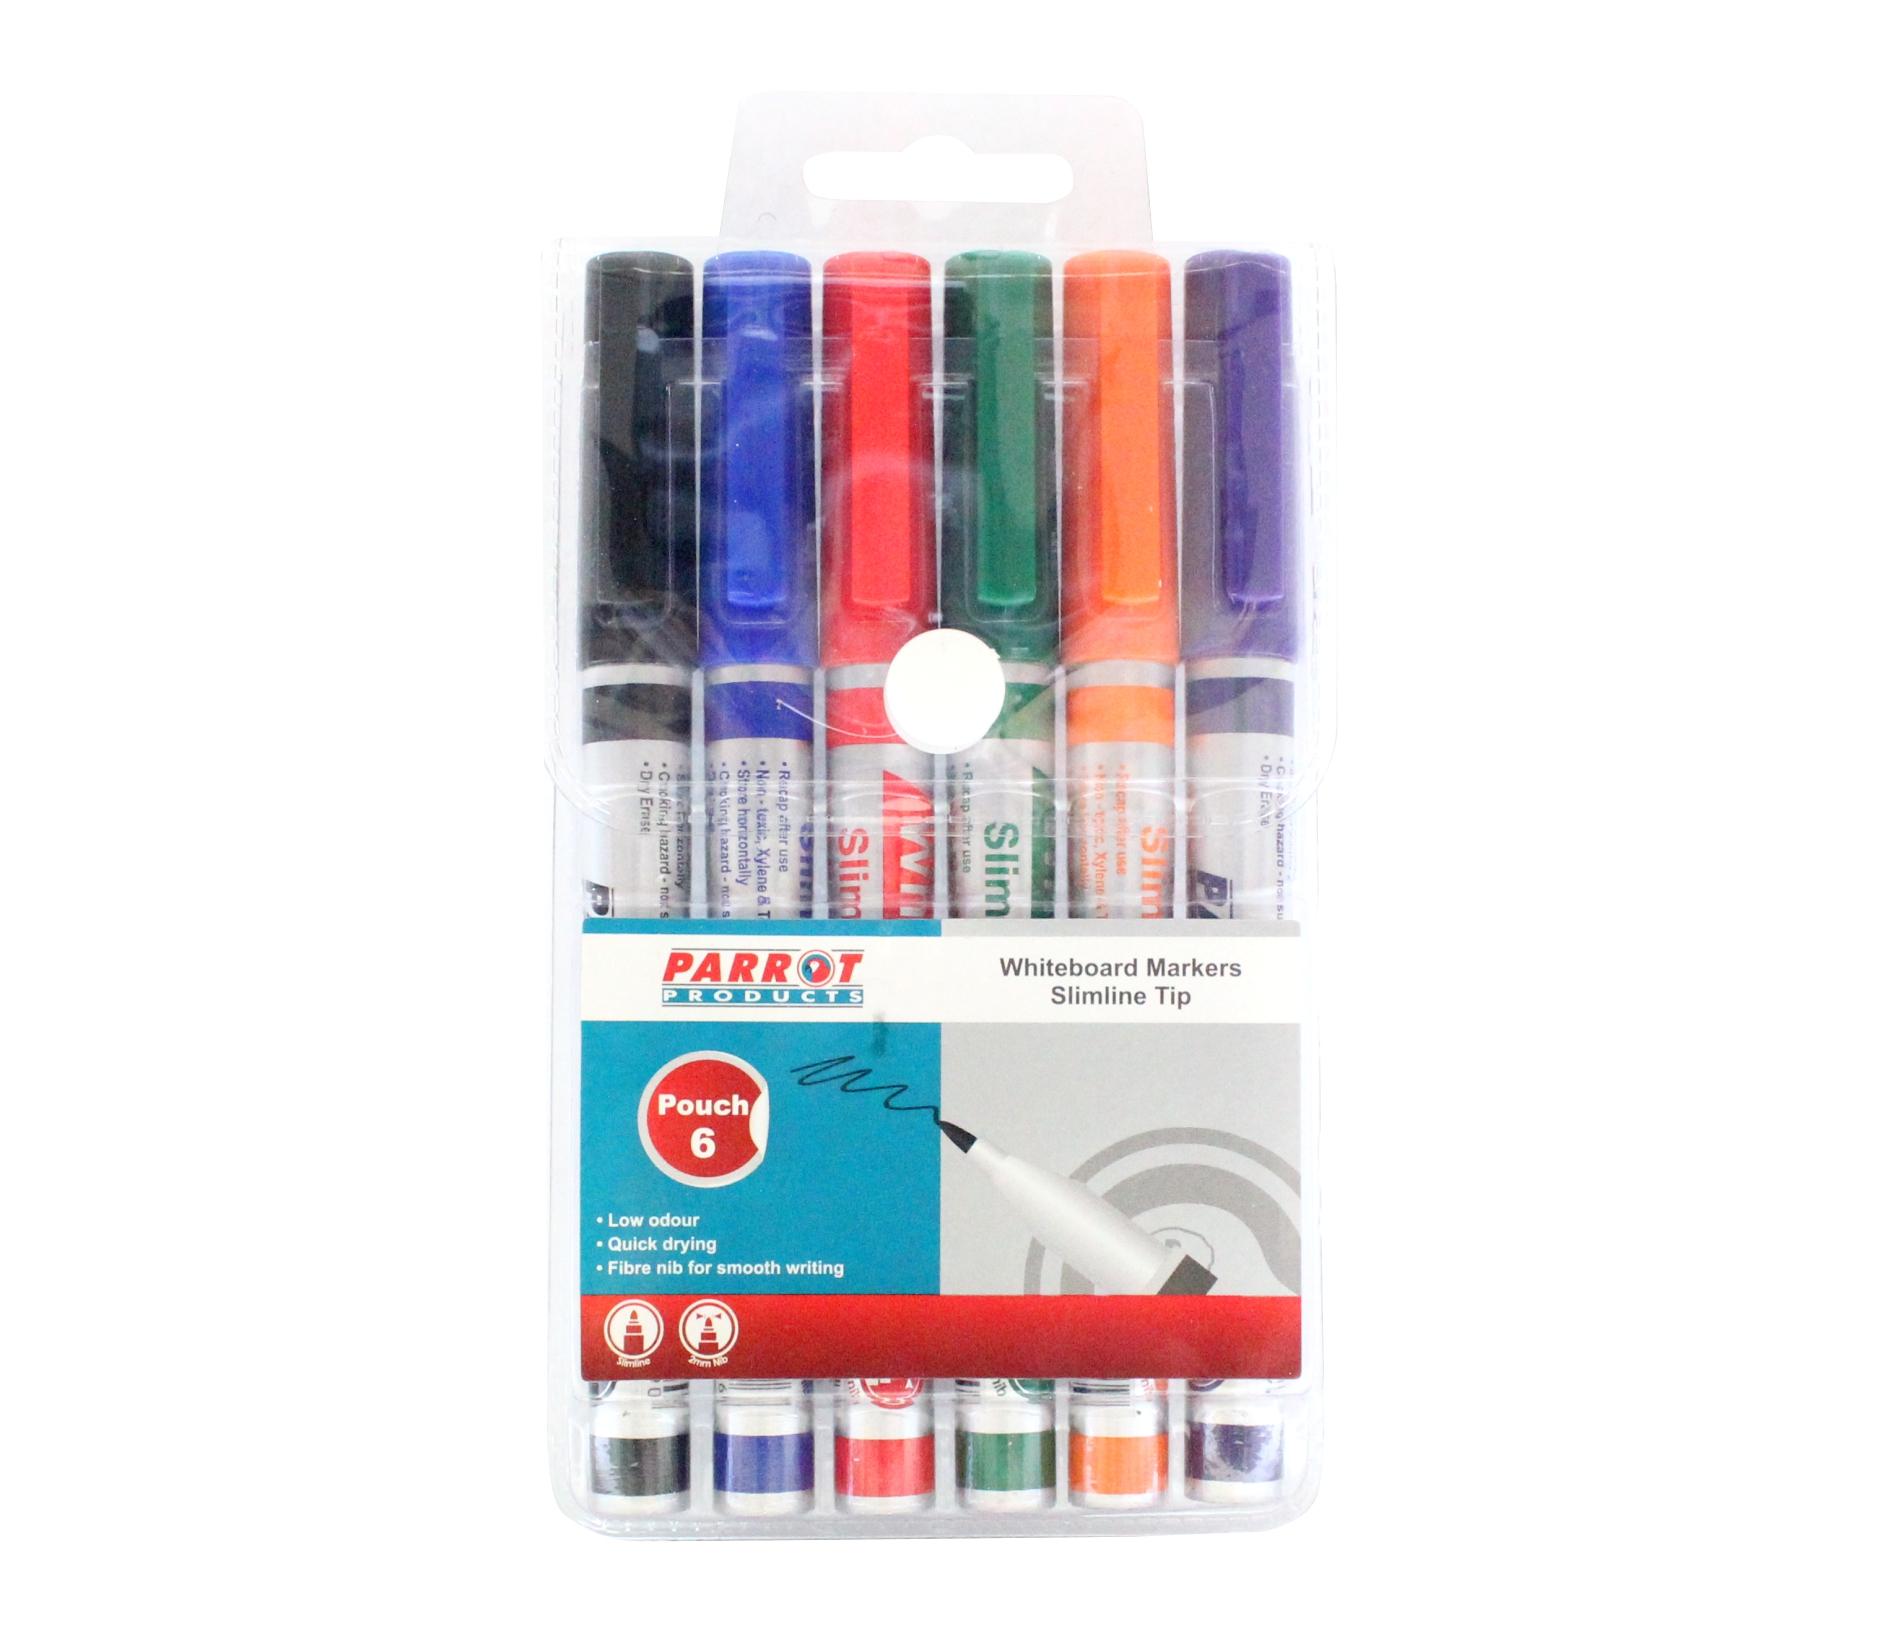 Whiteboard Markers (6 Markers - Slimline Tip - Carded)